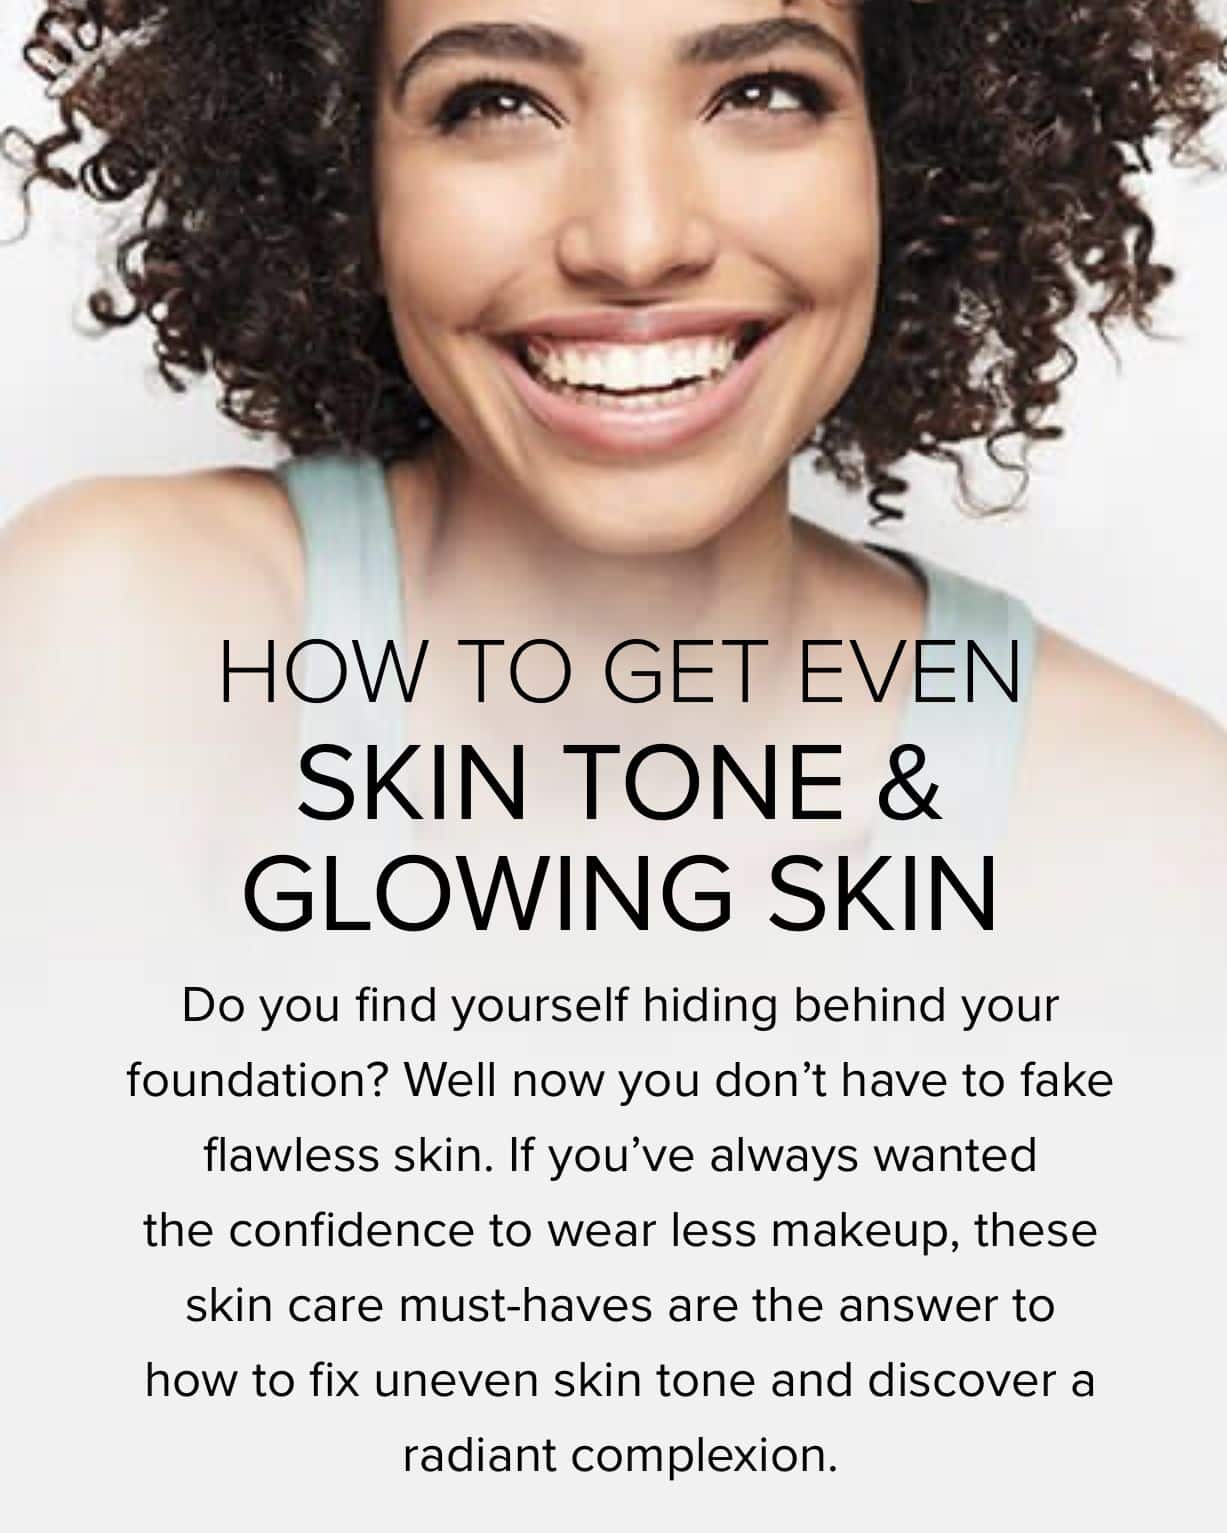 How to get even skin tone and glowing skin